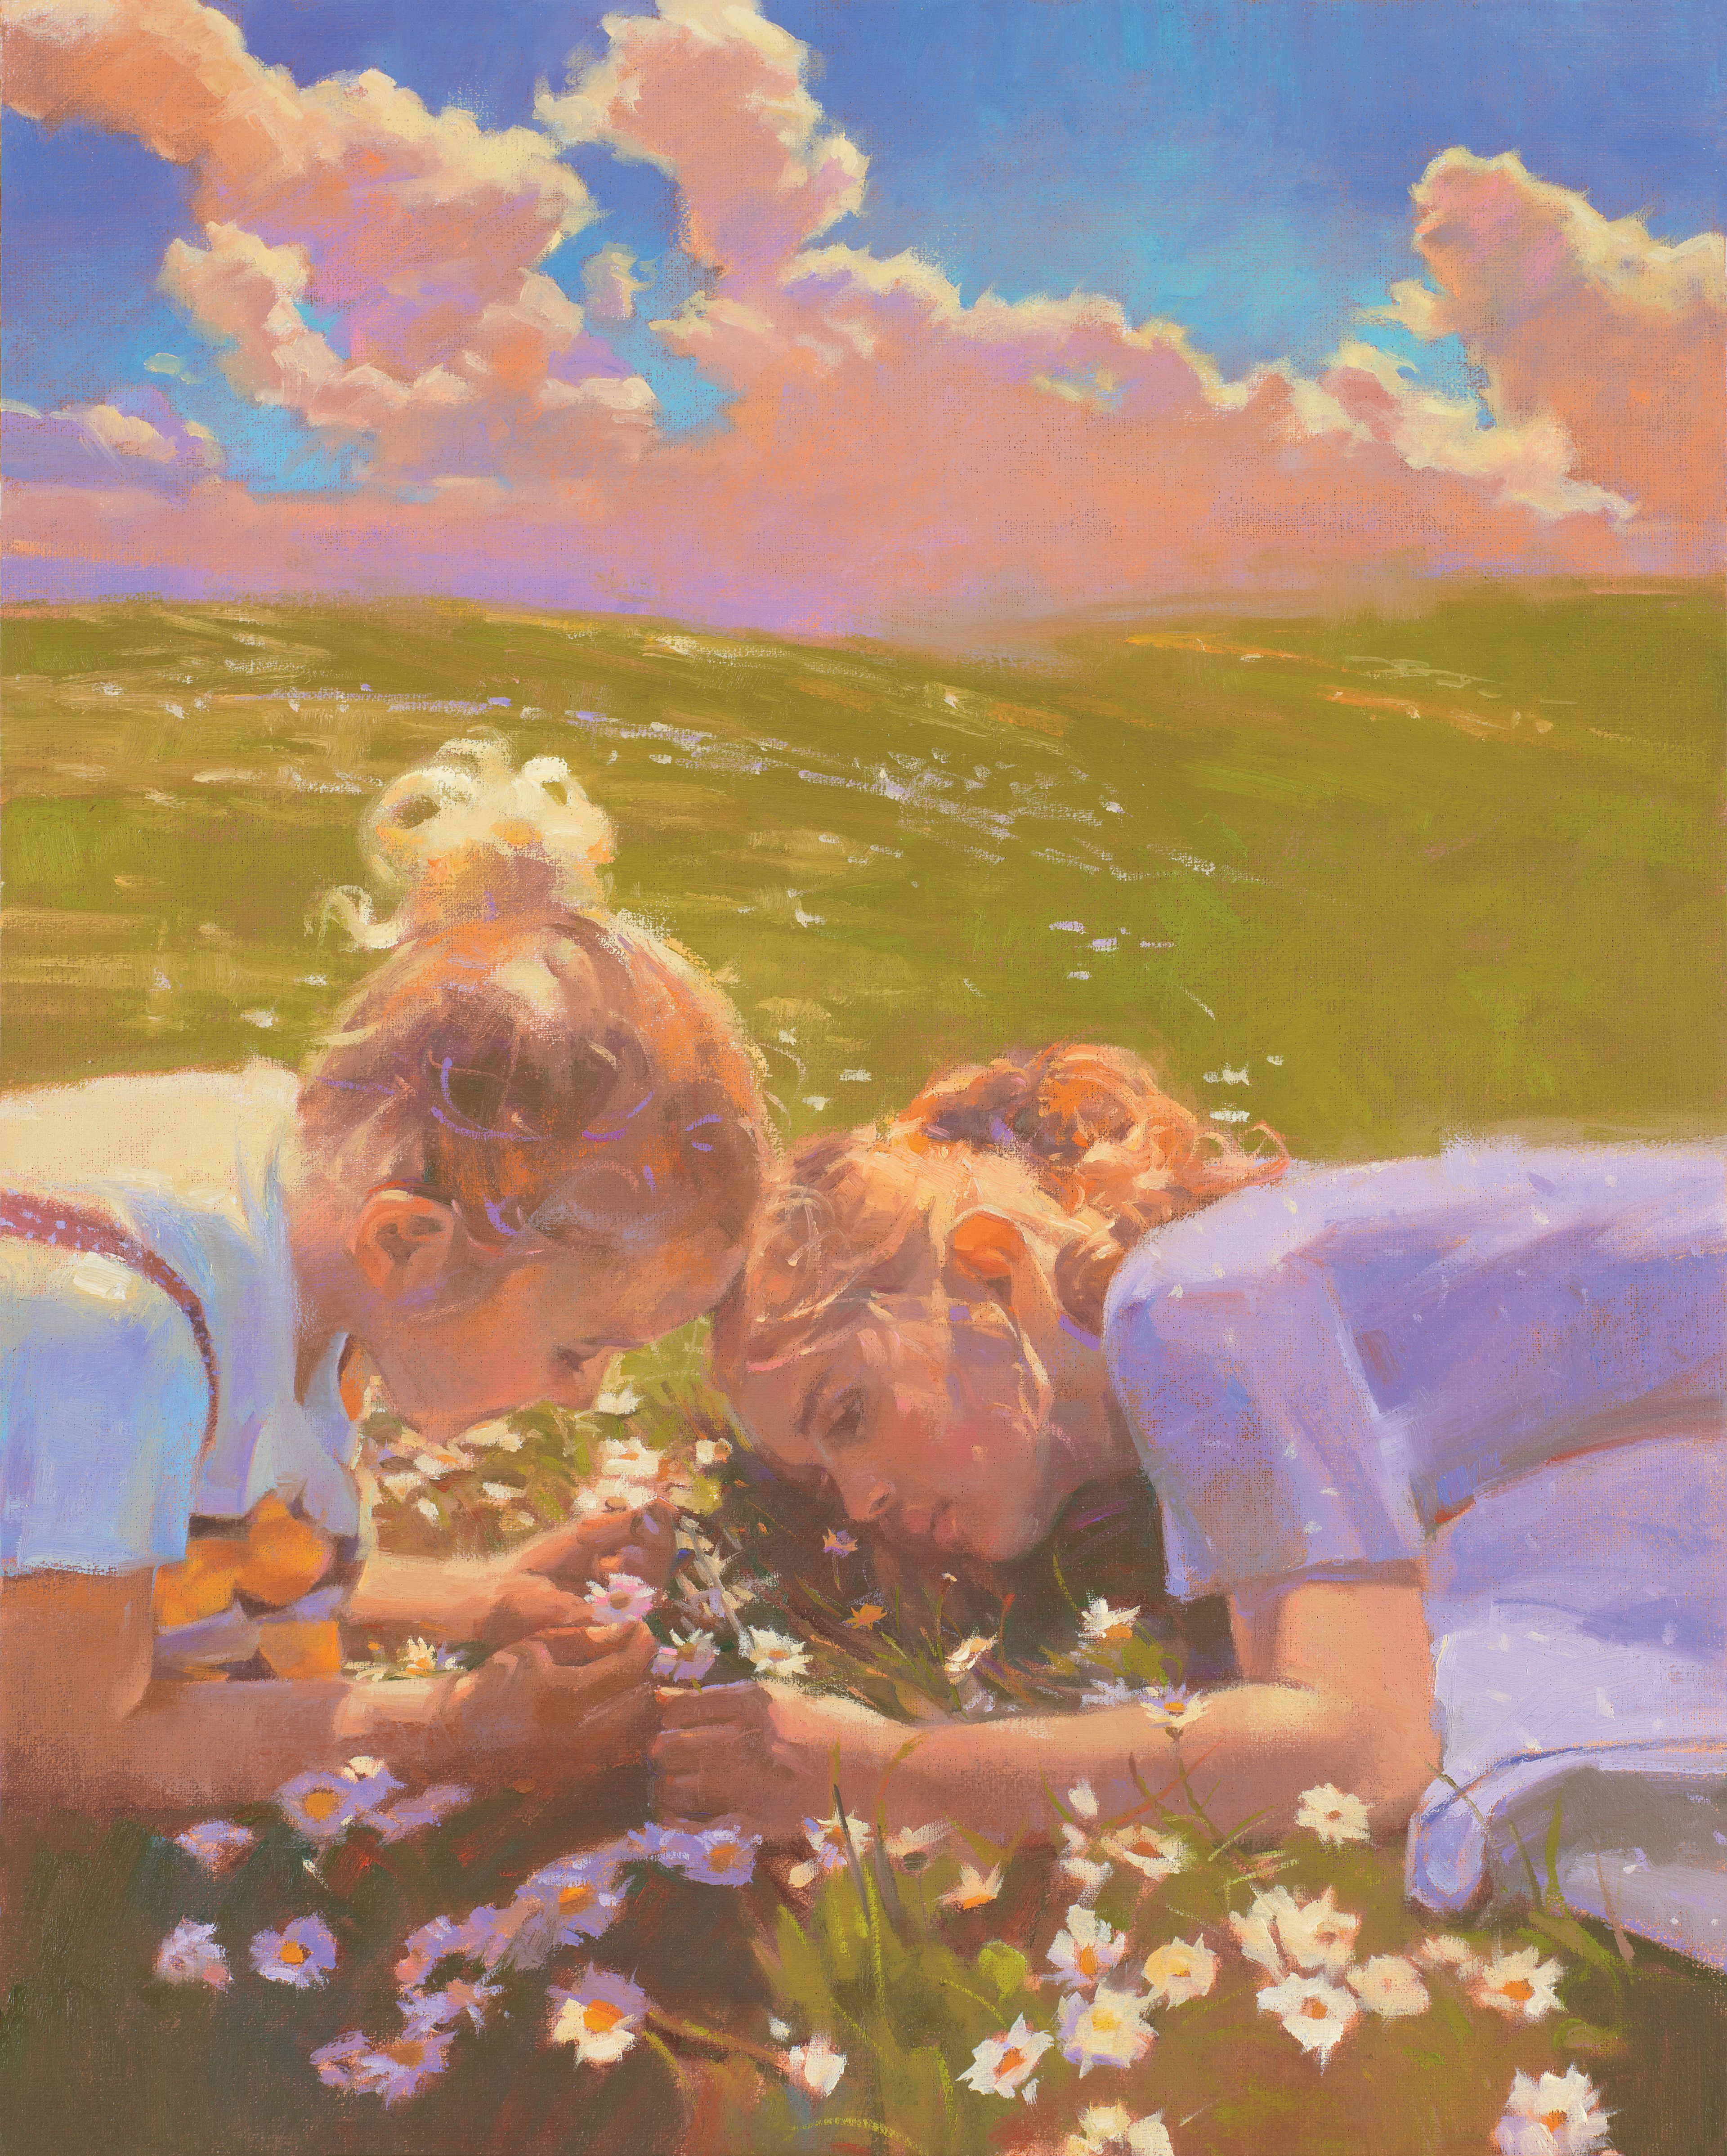 Two sisters pick daisies together in a field.